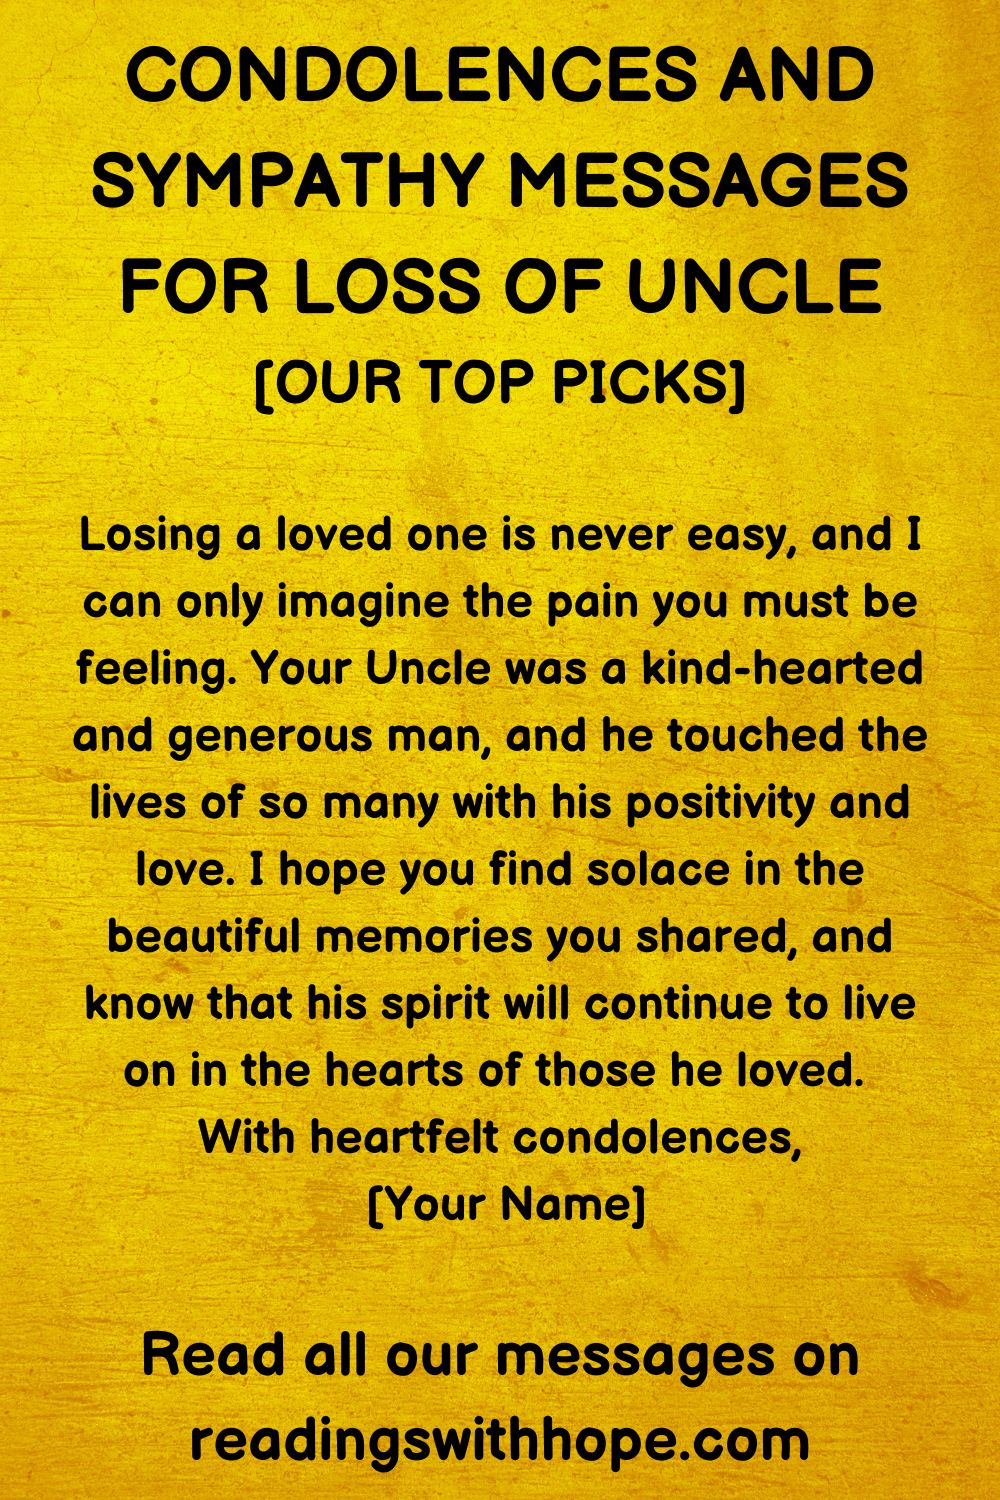 40 Condolence and Sympathy Messages for Loss of Uncle